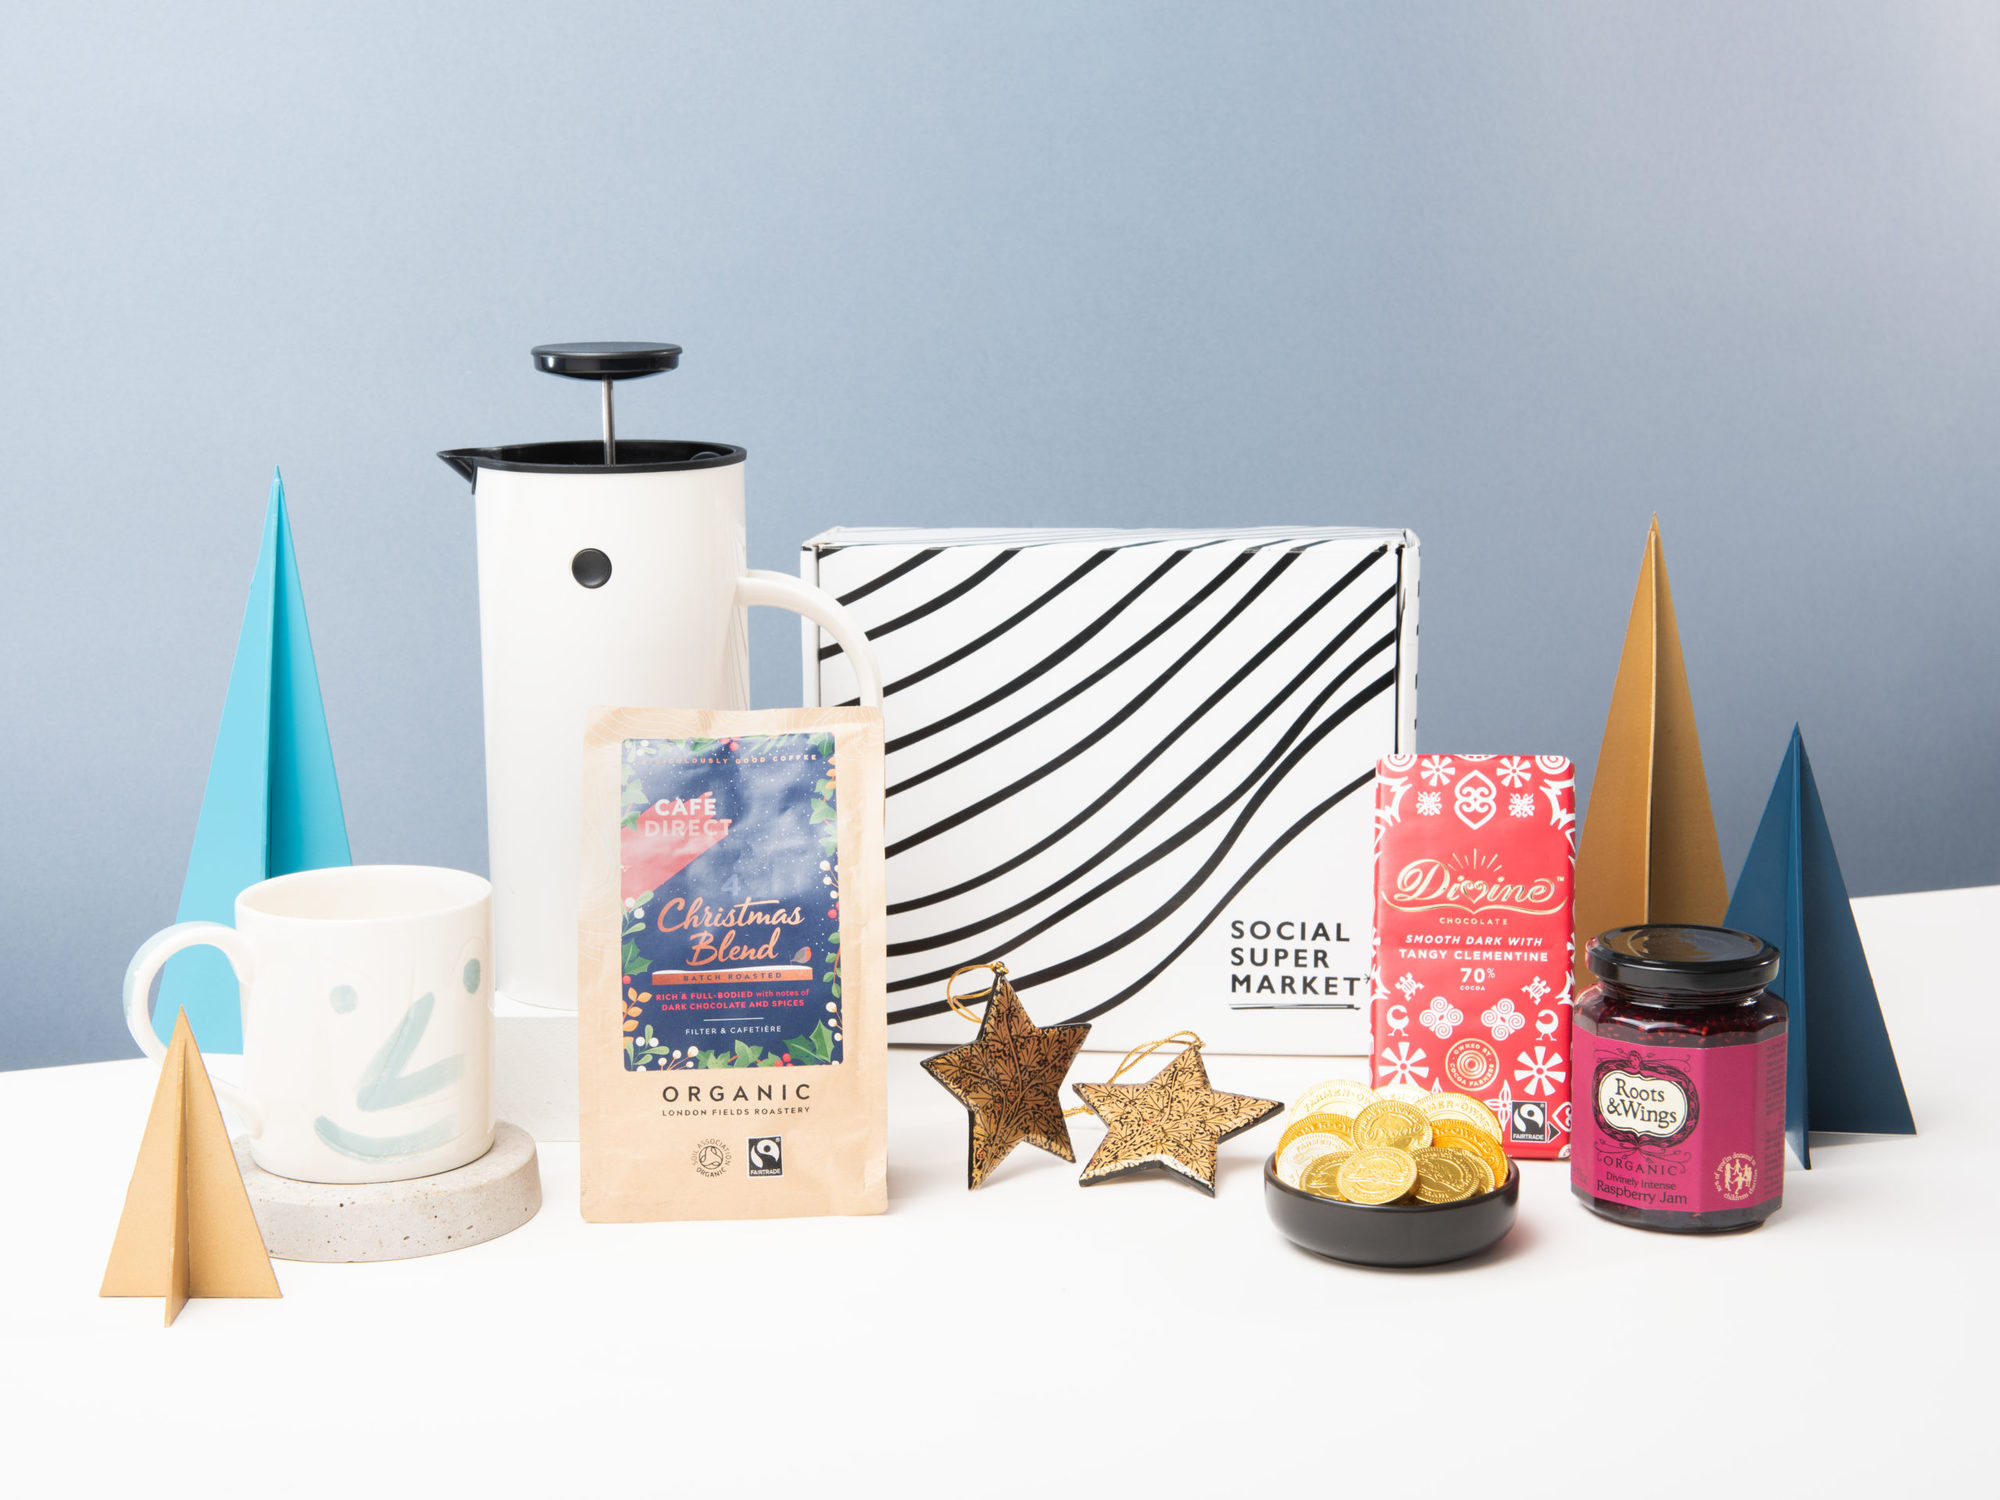 The Ethical Christmas Essentials Gift Box